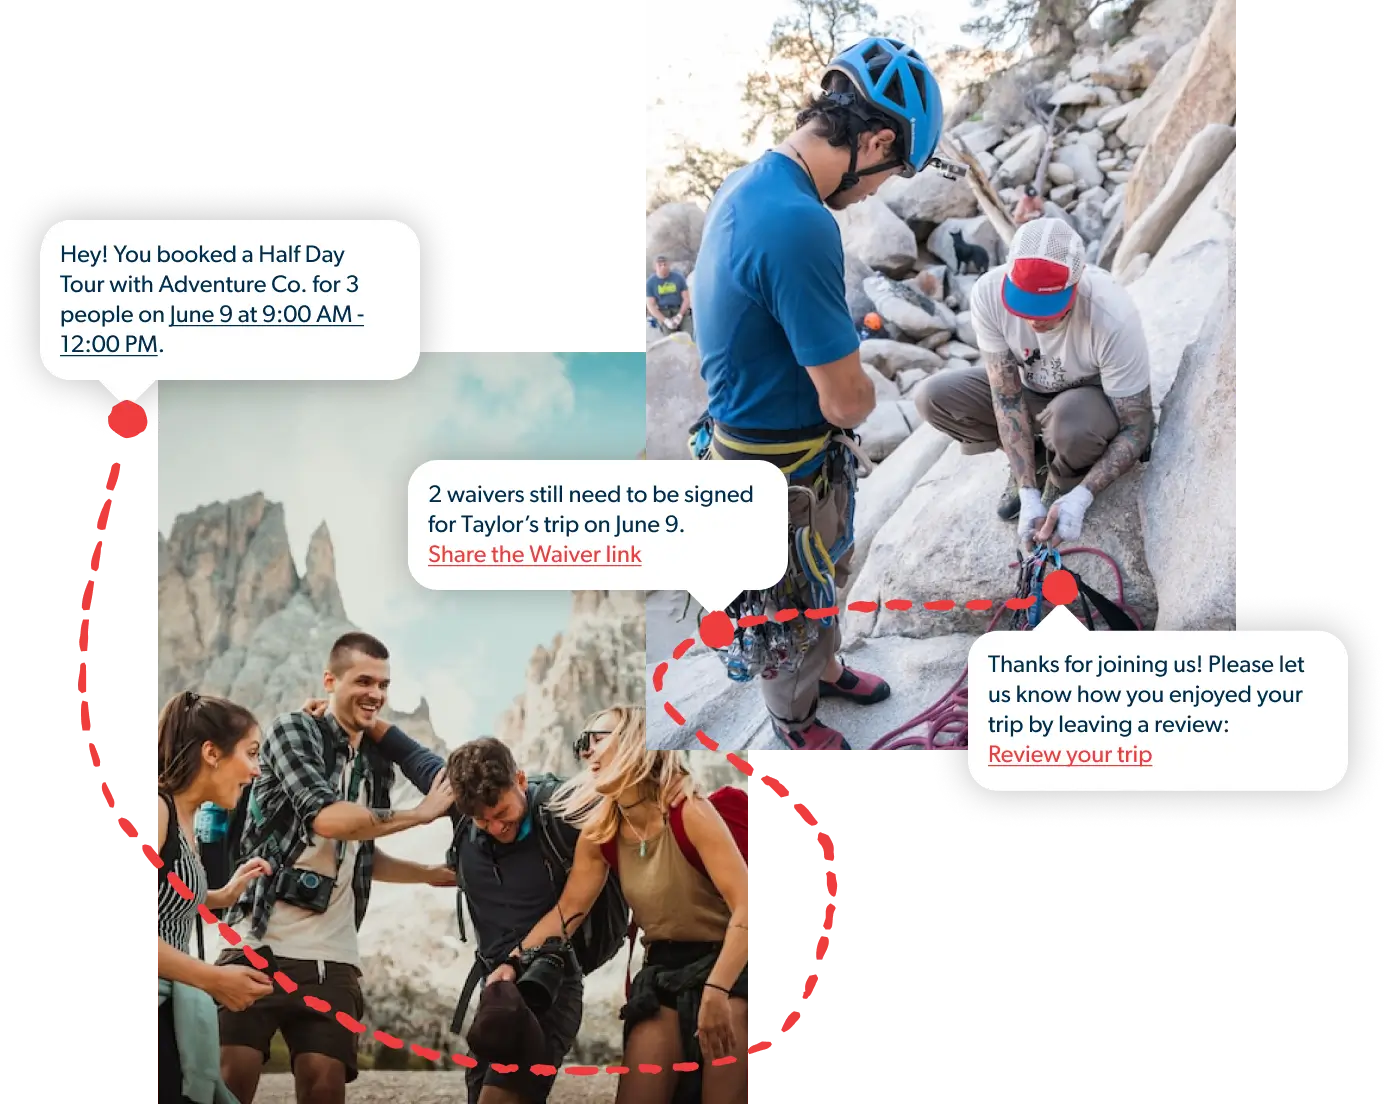 A photo of two rock climbers at the bottom of a crag and a photo of a group of hikers, overlaid with screenshots from the Origin app